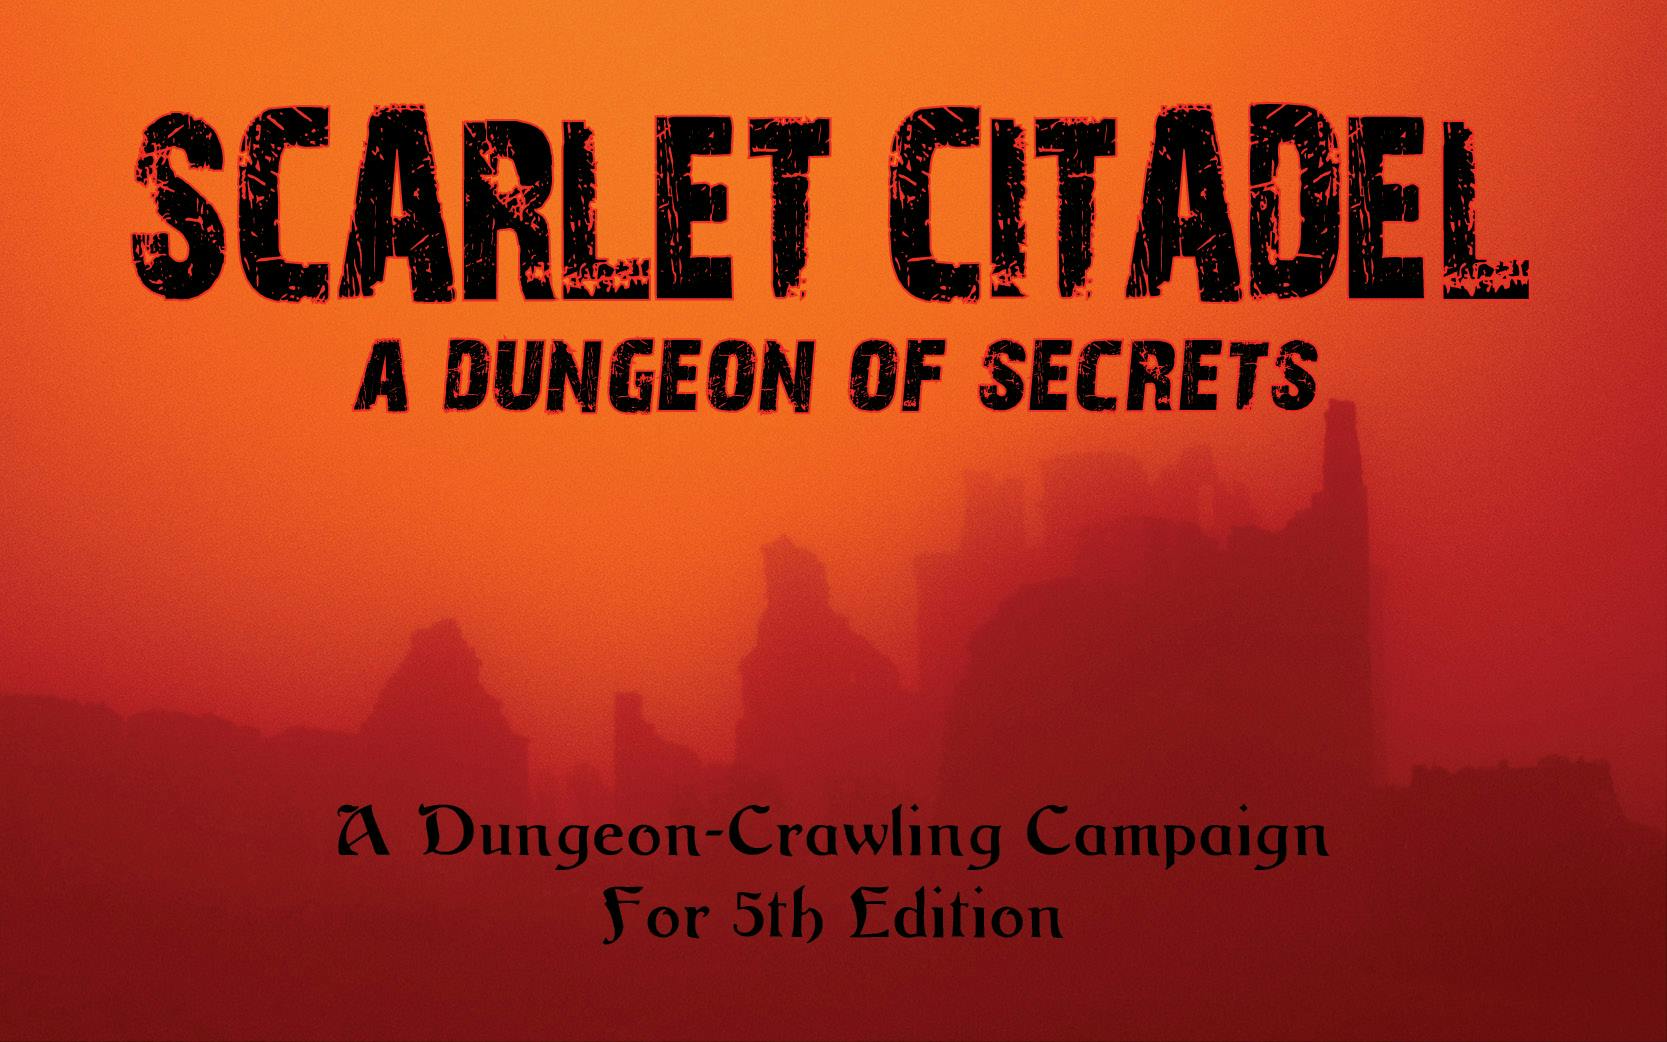 Scarlet Citadel for 5th Edition